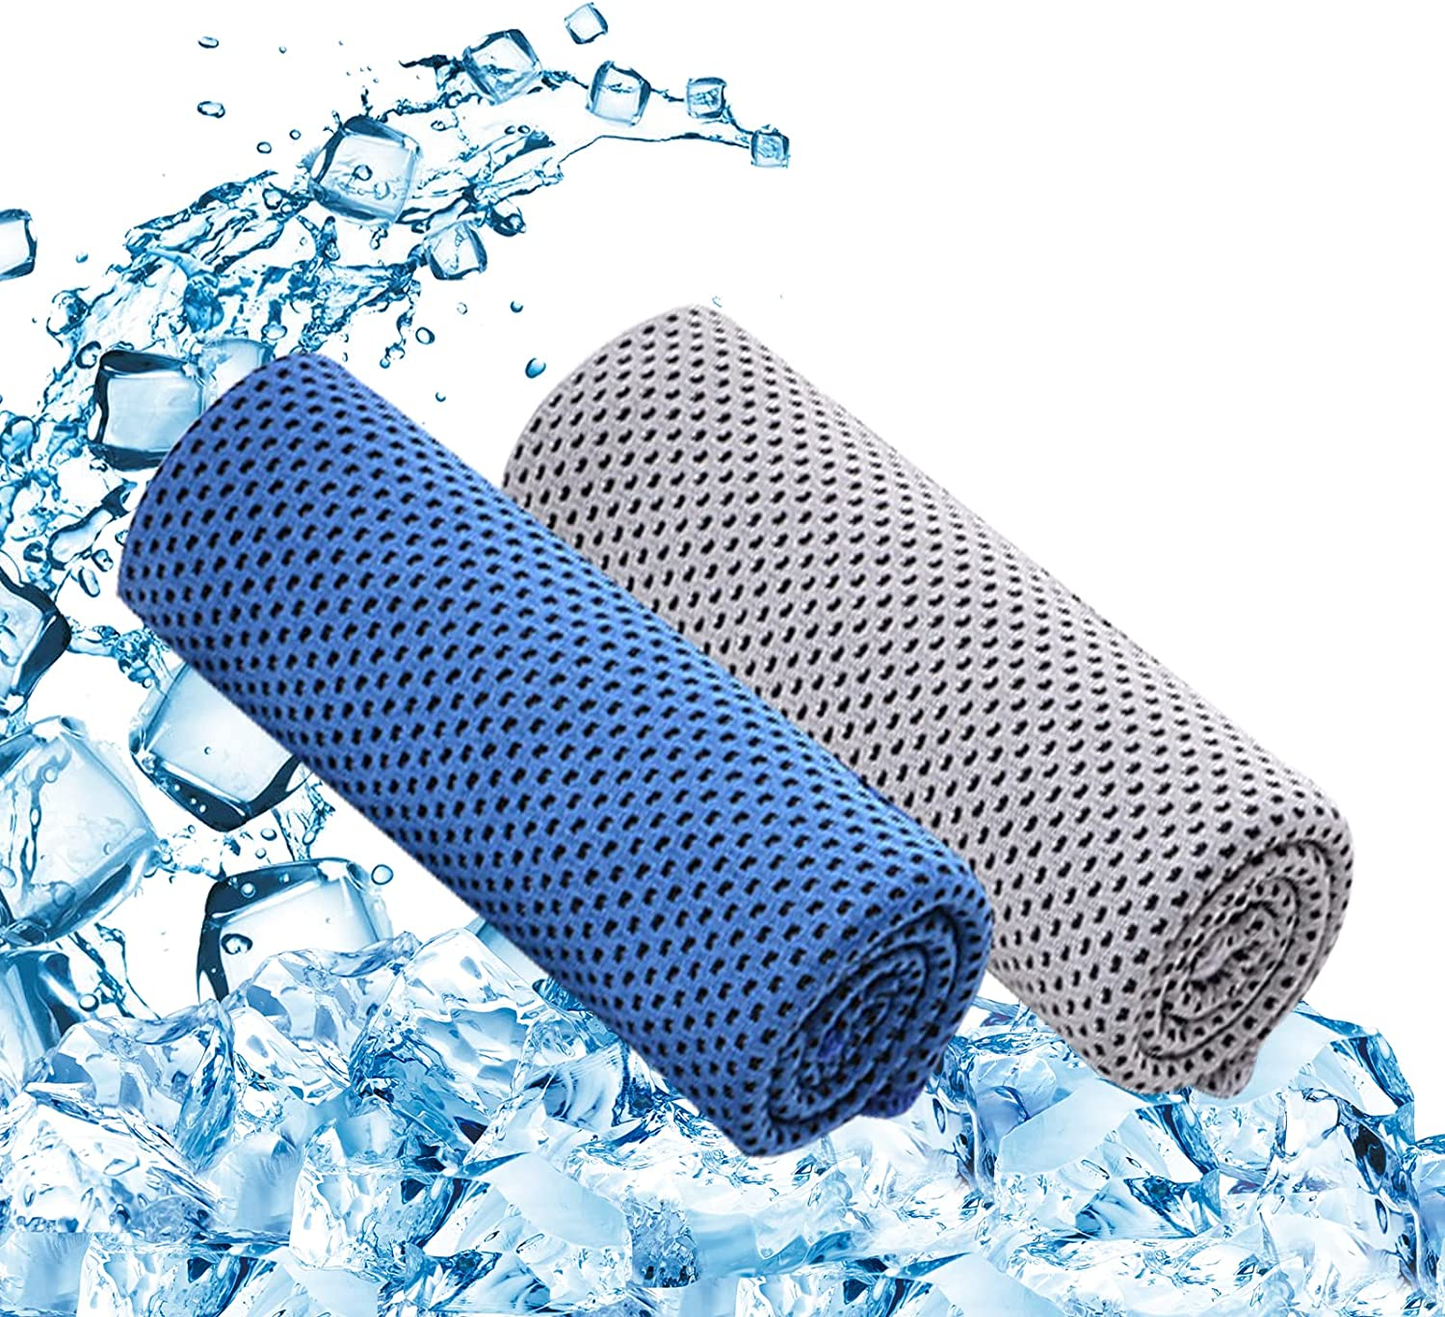 2 Pack Cooling Towel,Ice Towel,Soft Breathable Chilly Towel, (36"X 12") Microfiber Towel for Yoga,Sport,Running,Gym,Workout,Camping,Fitness,Workout & More Activities